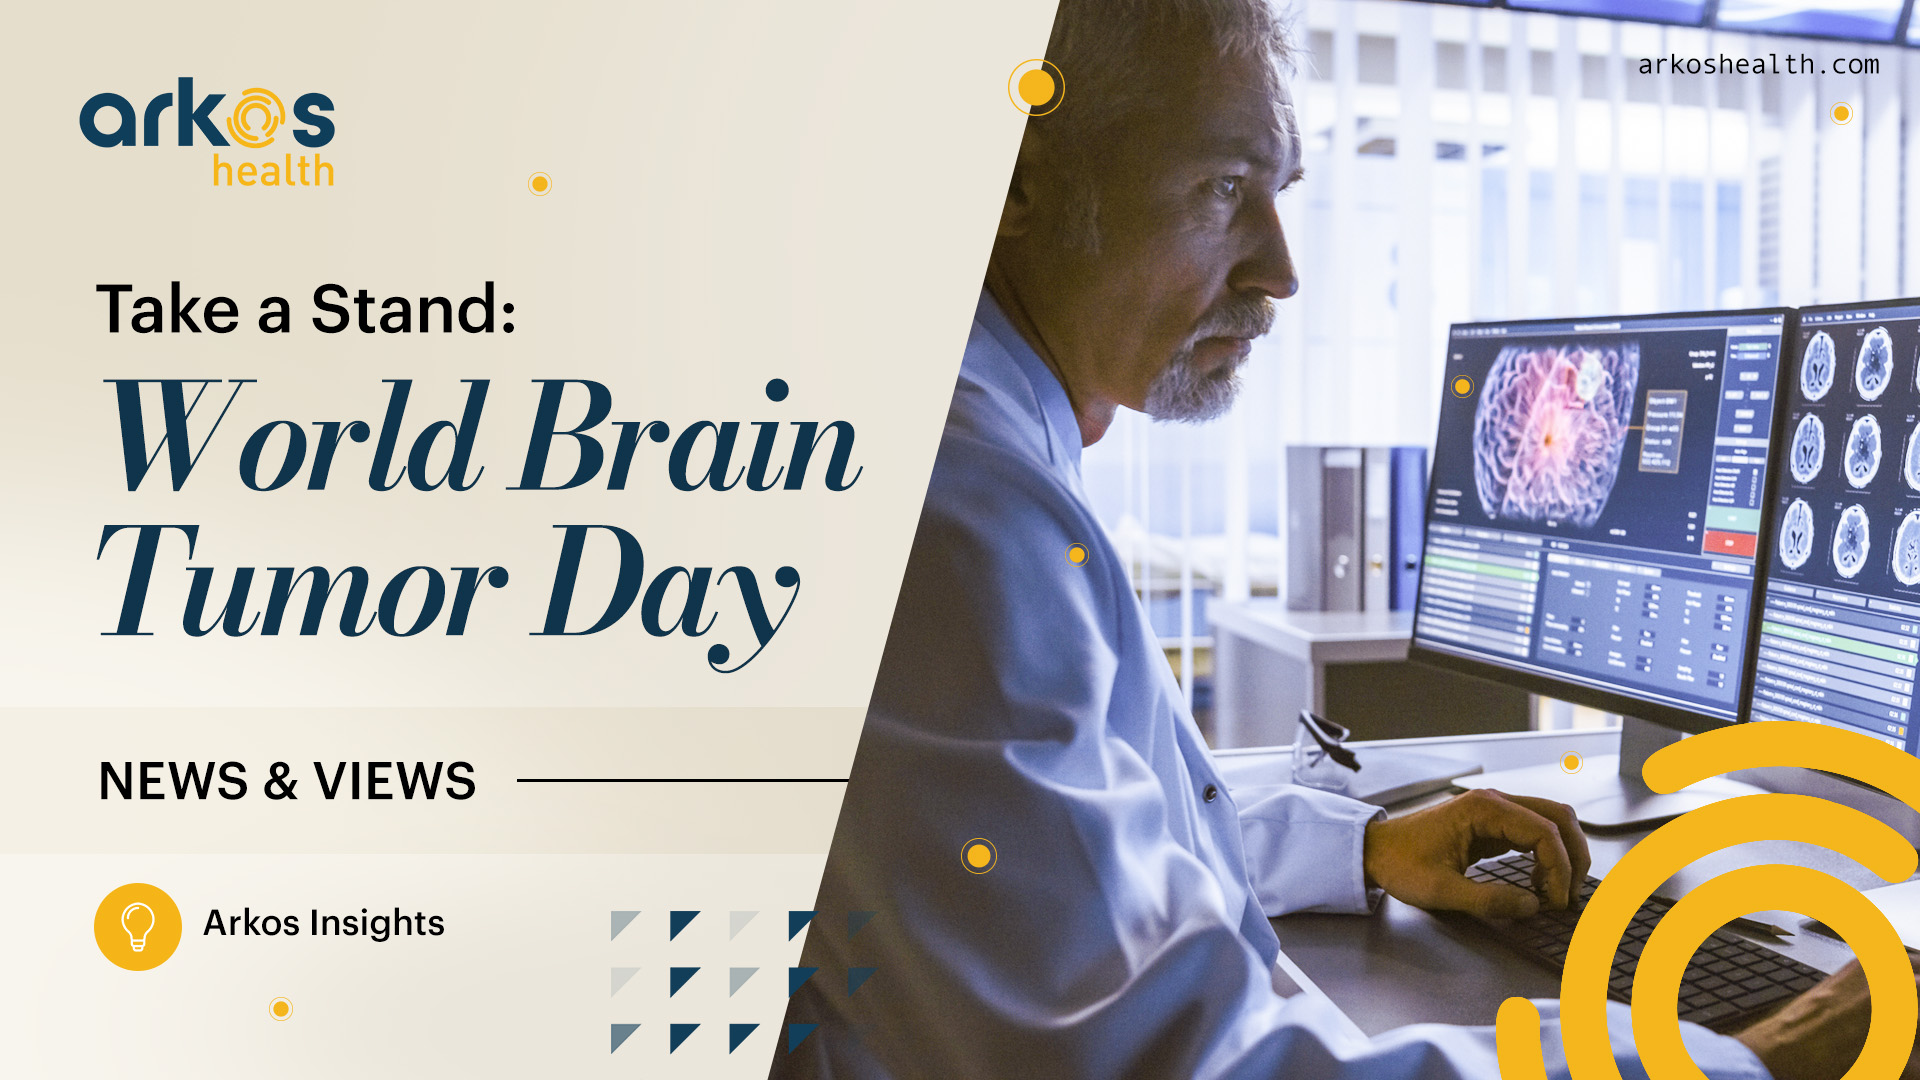 World Brain Tumor Day: While Research Continues, Let’s Continue to Raise Awareness